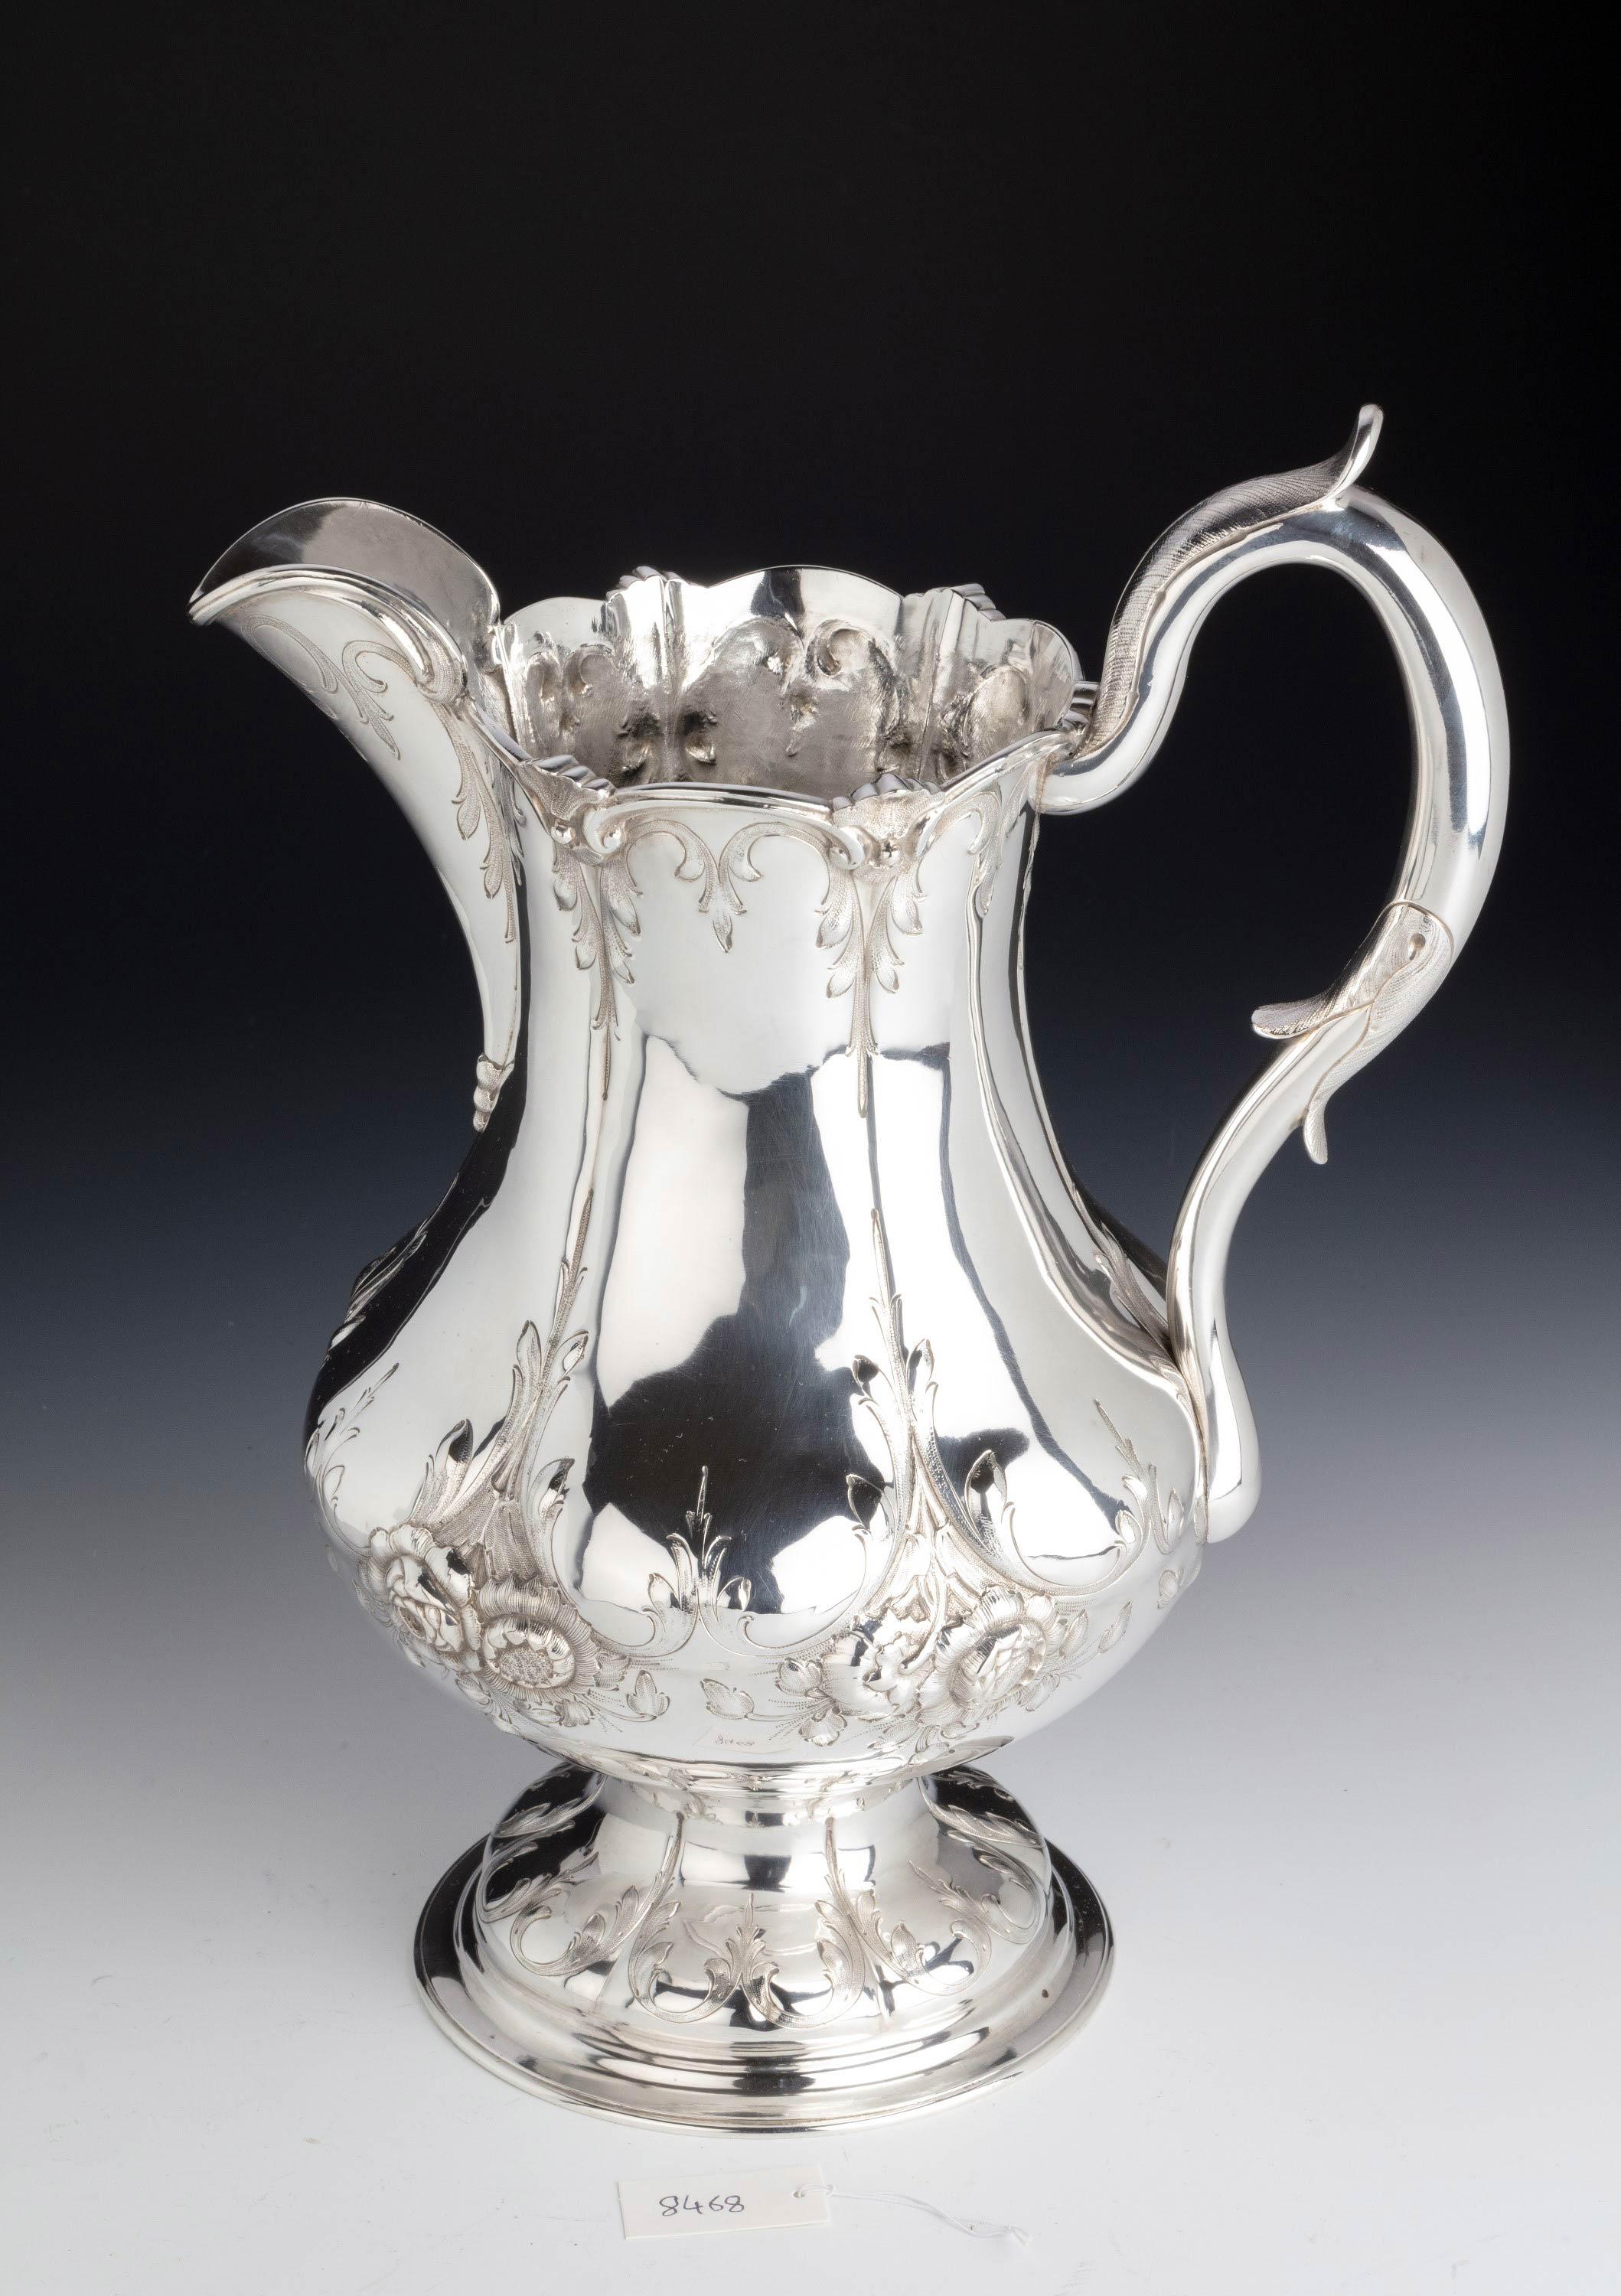 A handsome large American silver beer or water jug. Boston silver. With a finely carved top edge and scrolled handle. In excellent overall condition.